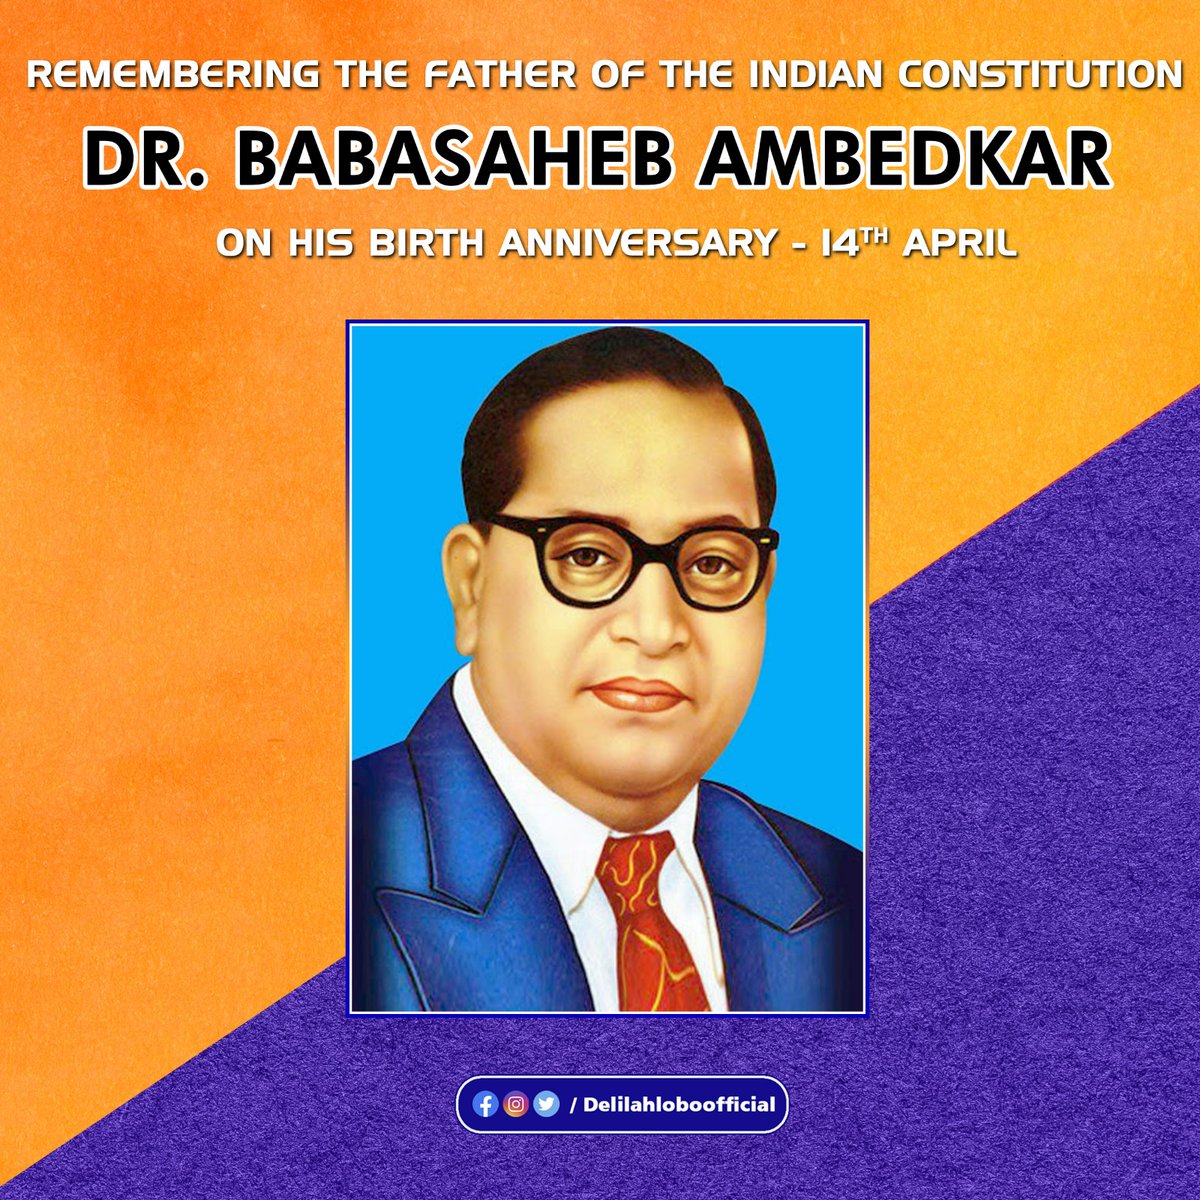 Honoring the visionary Dr. Babasaheb Ambedkar on his Jayanti. His remarkable dedication to equality continues to inspire us all. #AmbedkarJayanti